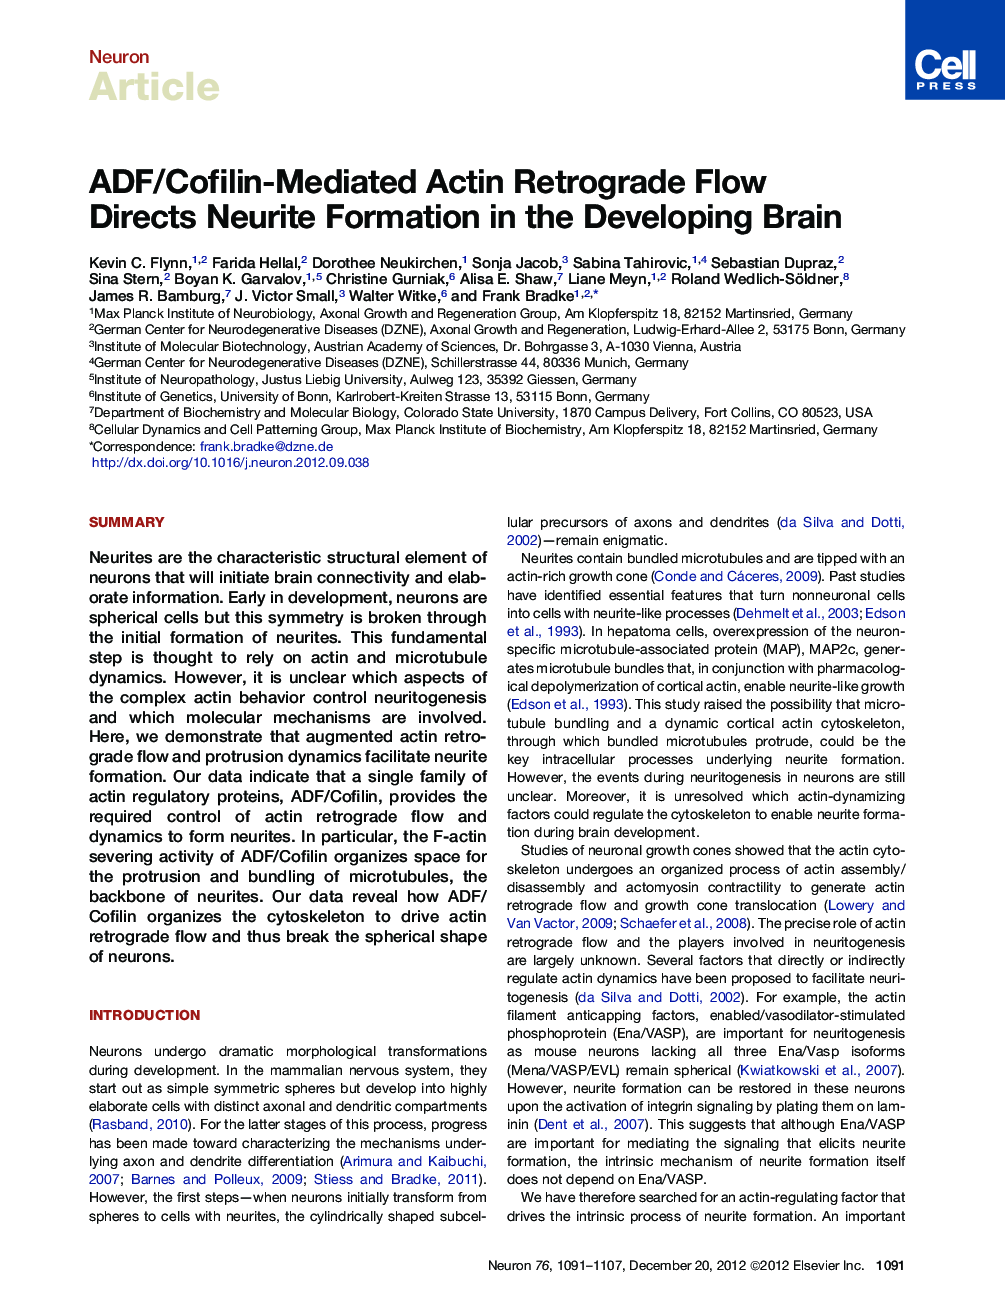 ADF/Cofilin-Mediated Actin Retrograde Flow Directs Neurite Formation in the Developing Brain